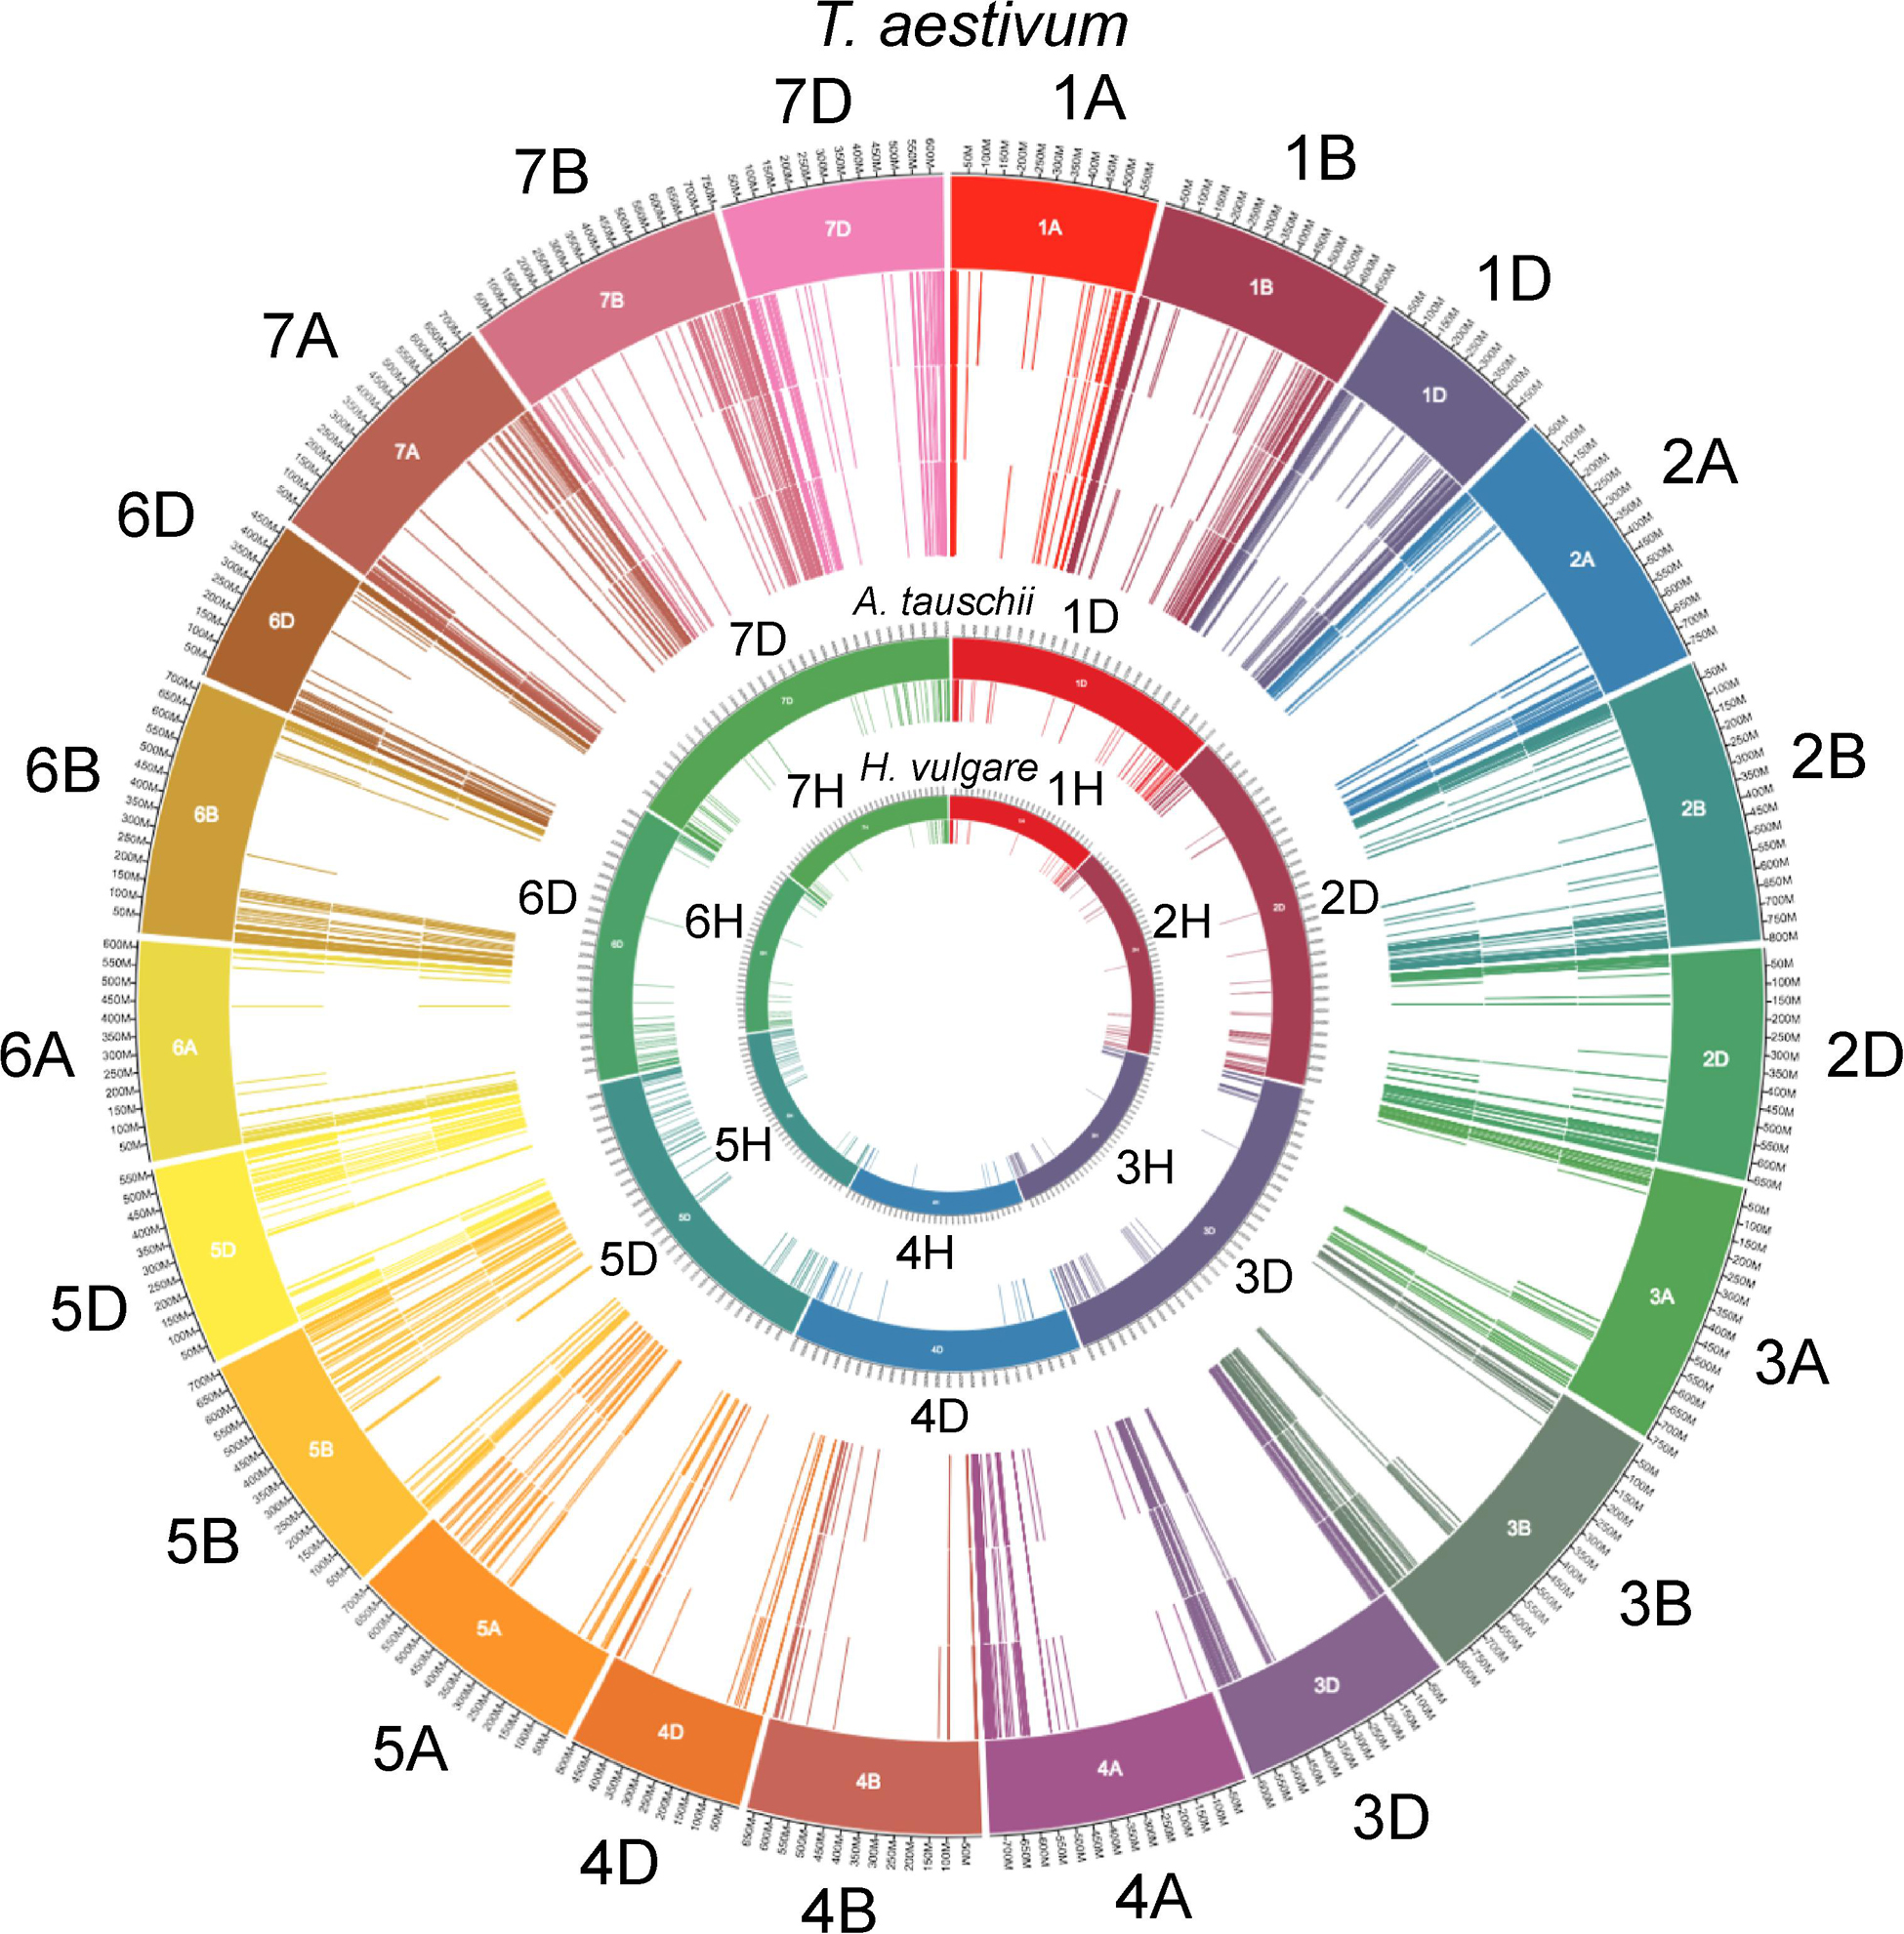 Frontiers Wheat Disease Resistance Genes And Their Diversification Through Integrated Domain Fusions Genetics